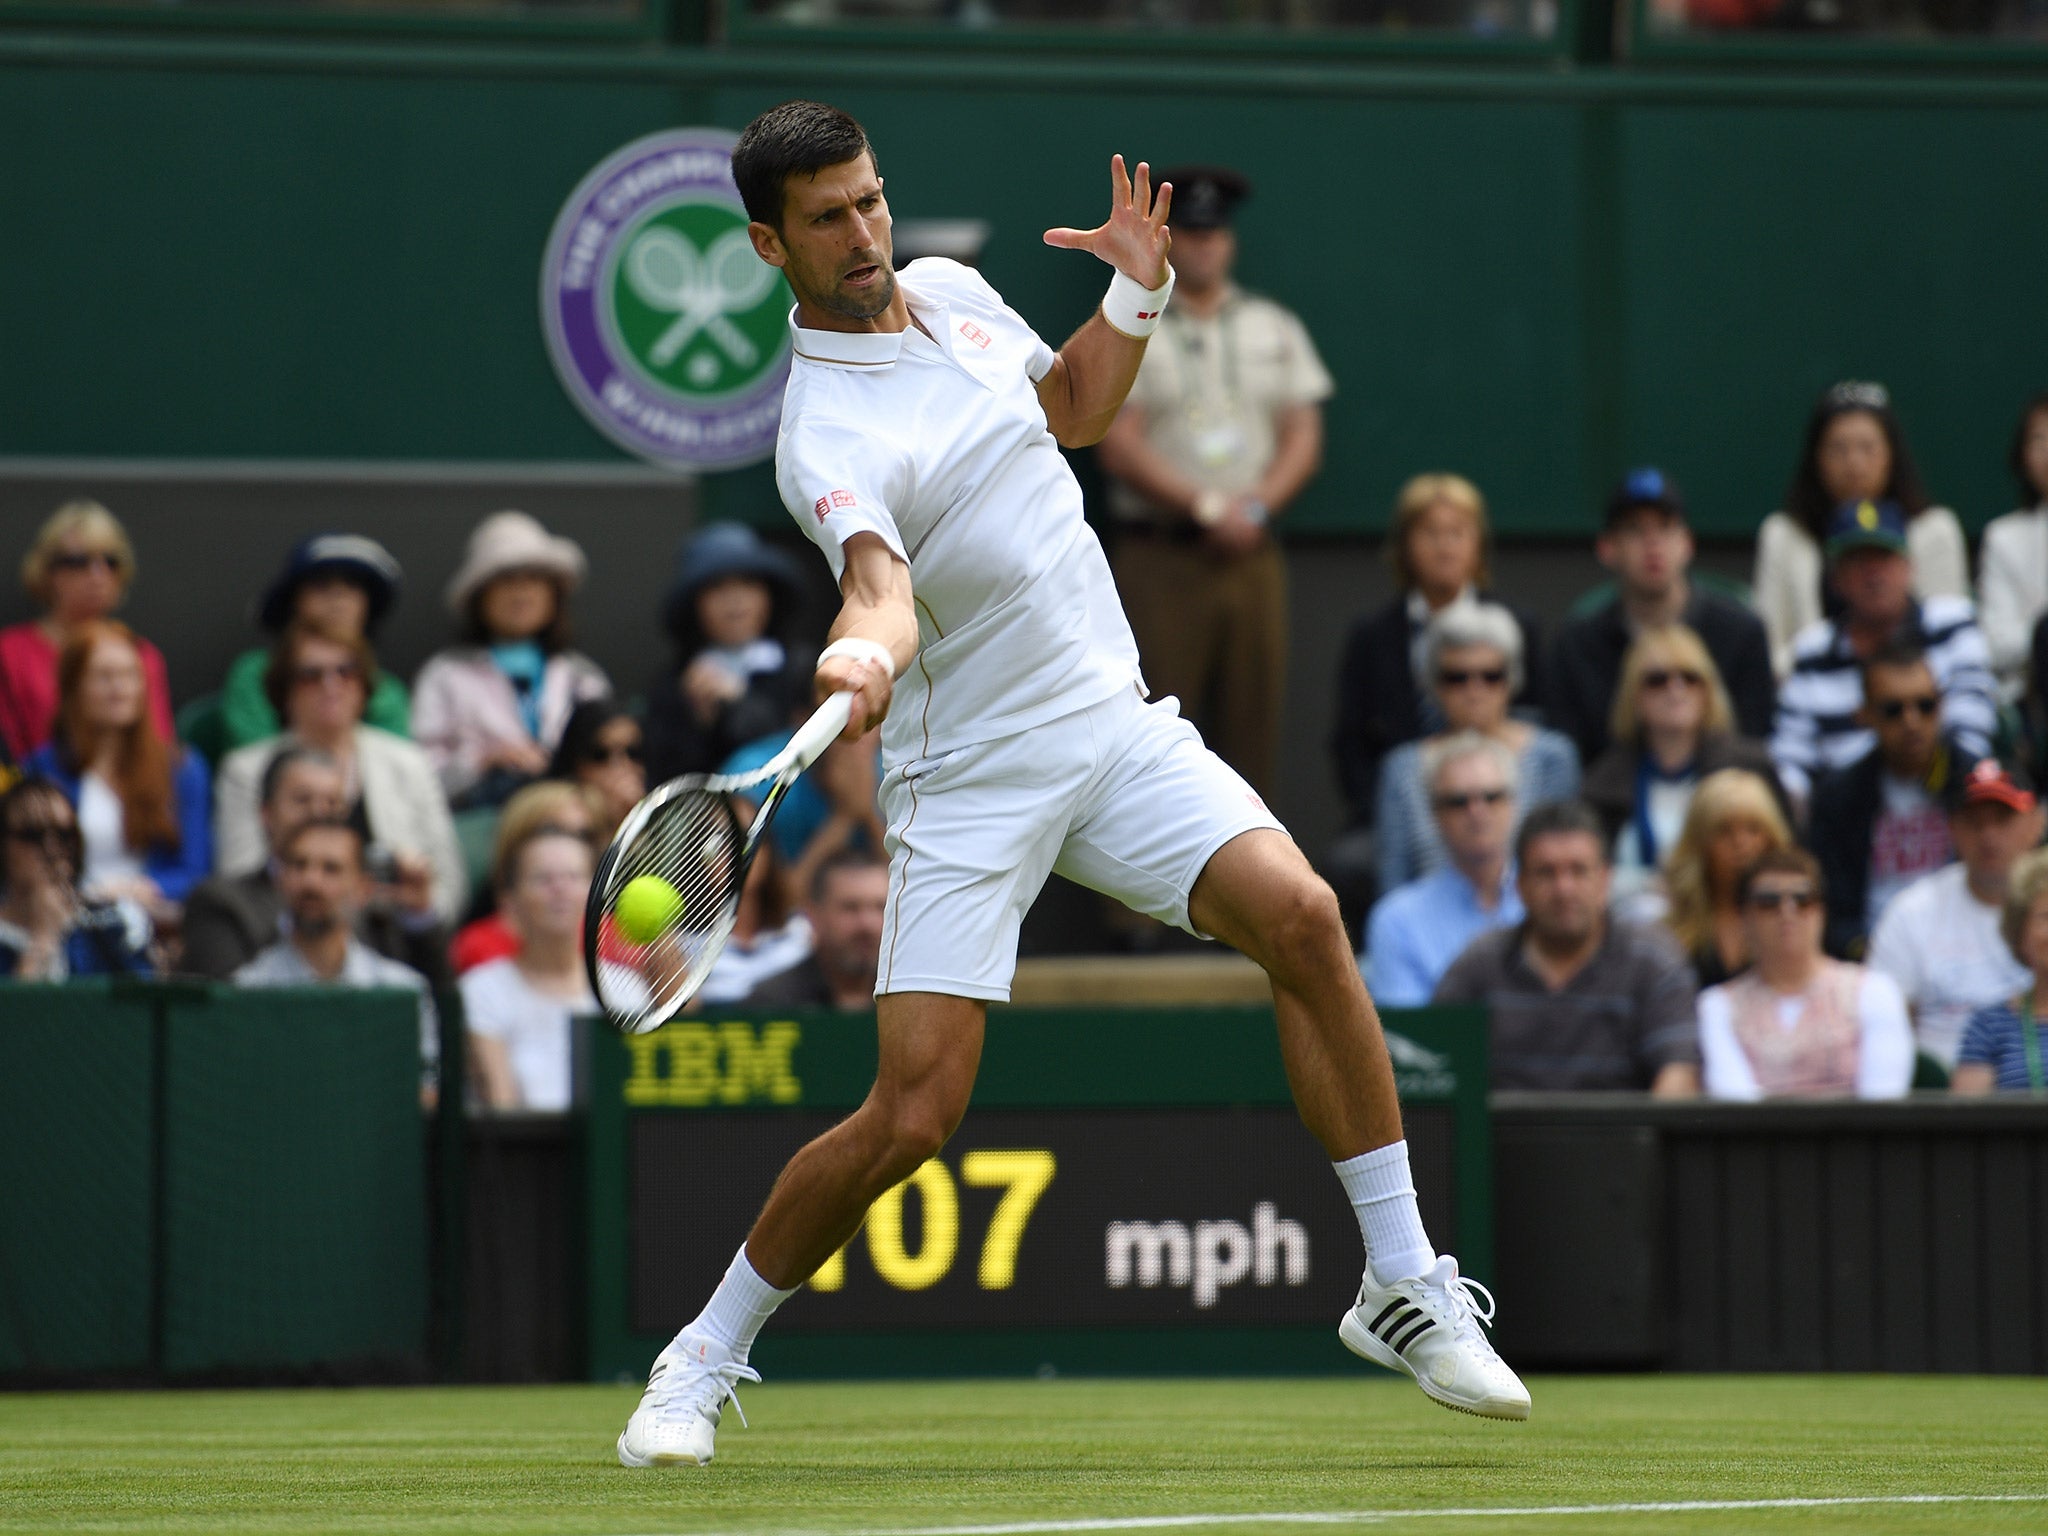 Wimbledon 2016 live Novak Djokovic beats James Ward to race through first round, plus Roger Federer in action The Independent The Independent